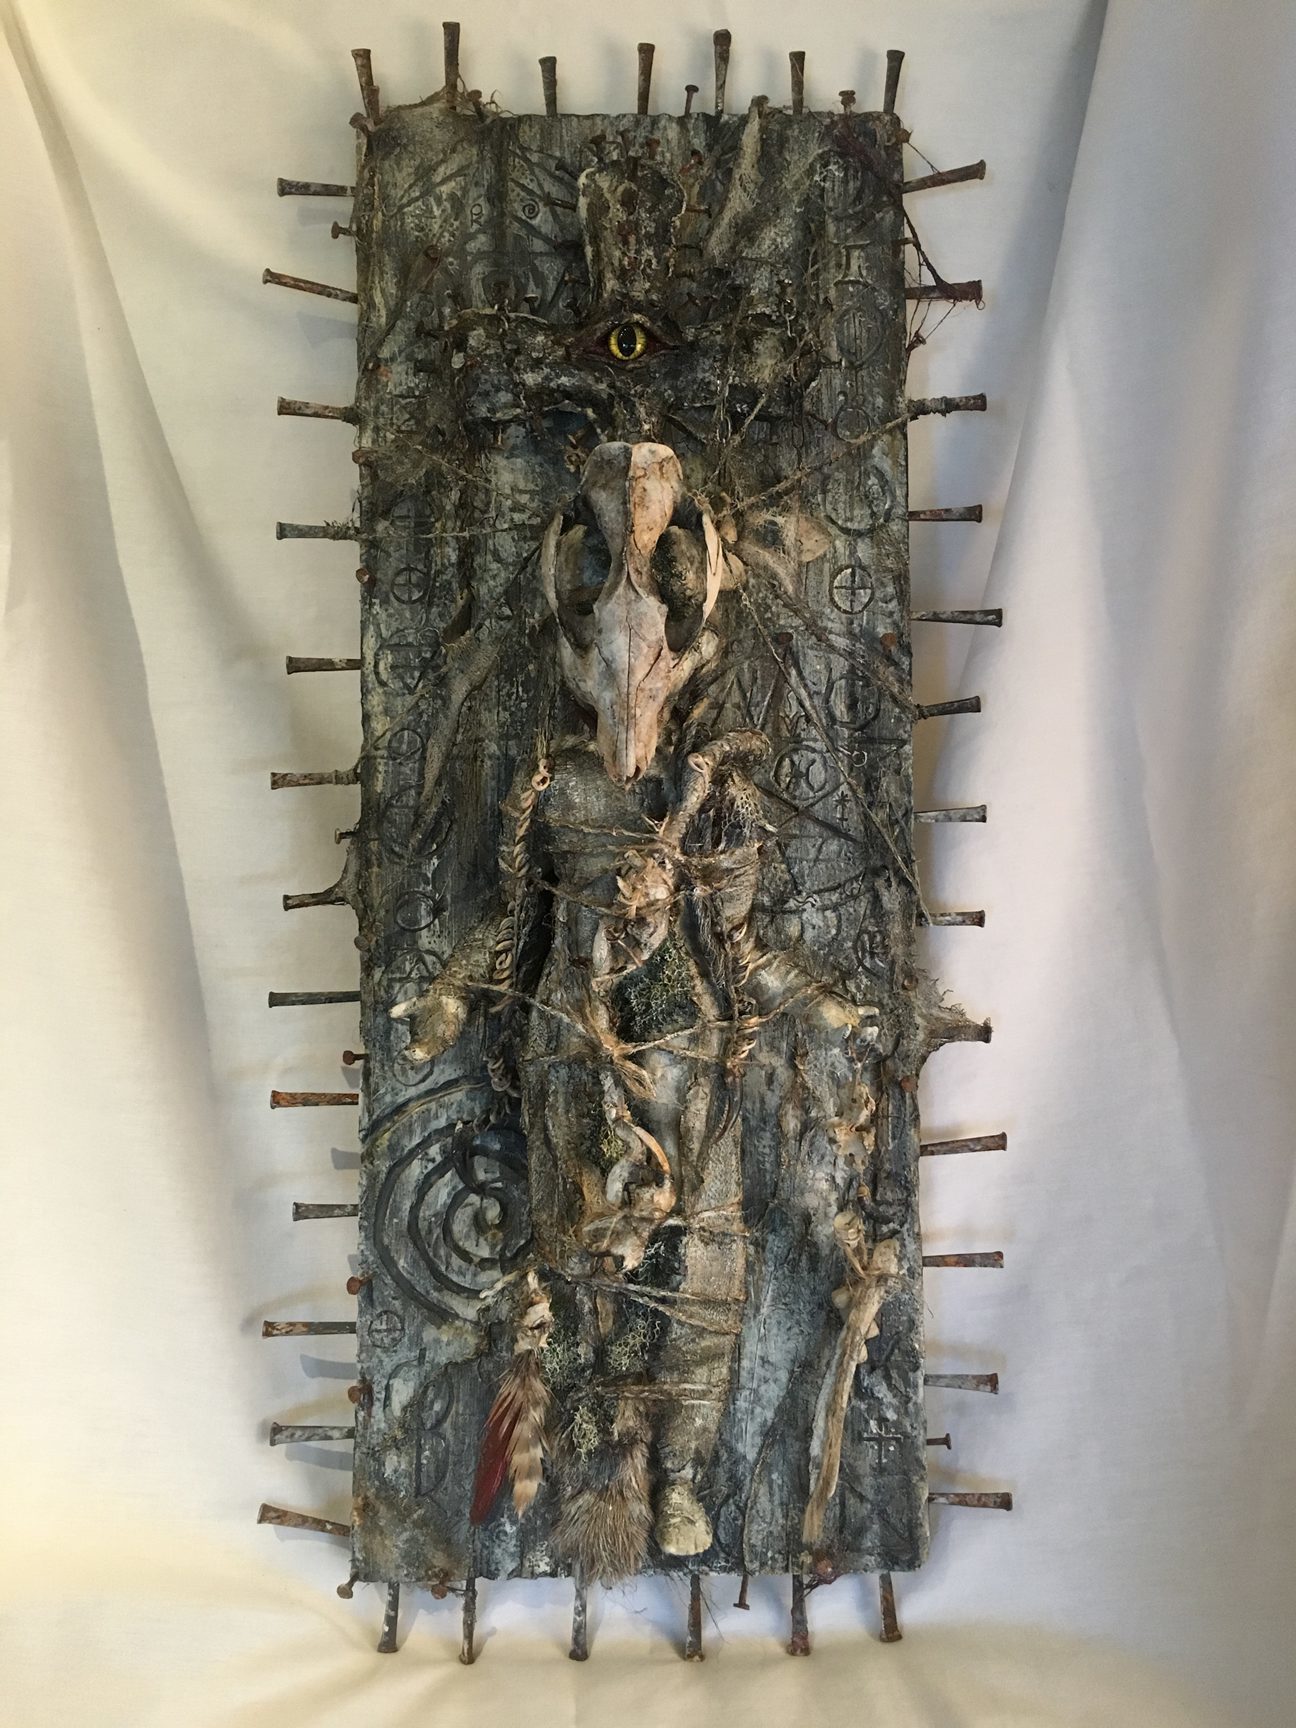 mixed media taxidermy assemblage repainted babydoll decorated with bones mounted to witchy board occult artifact